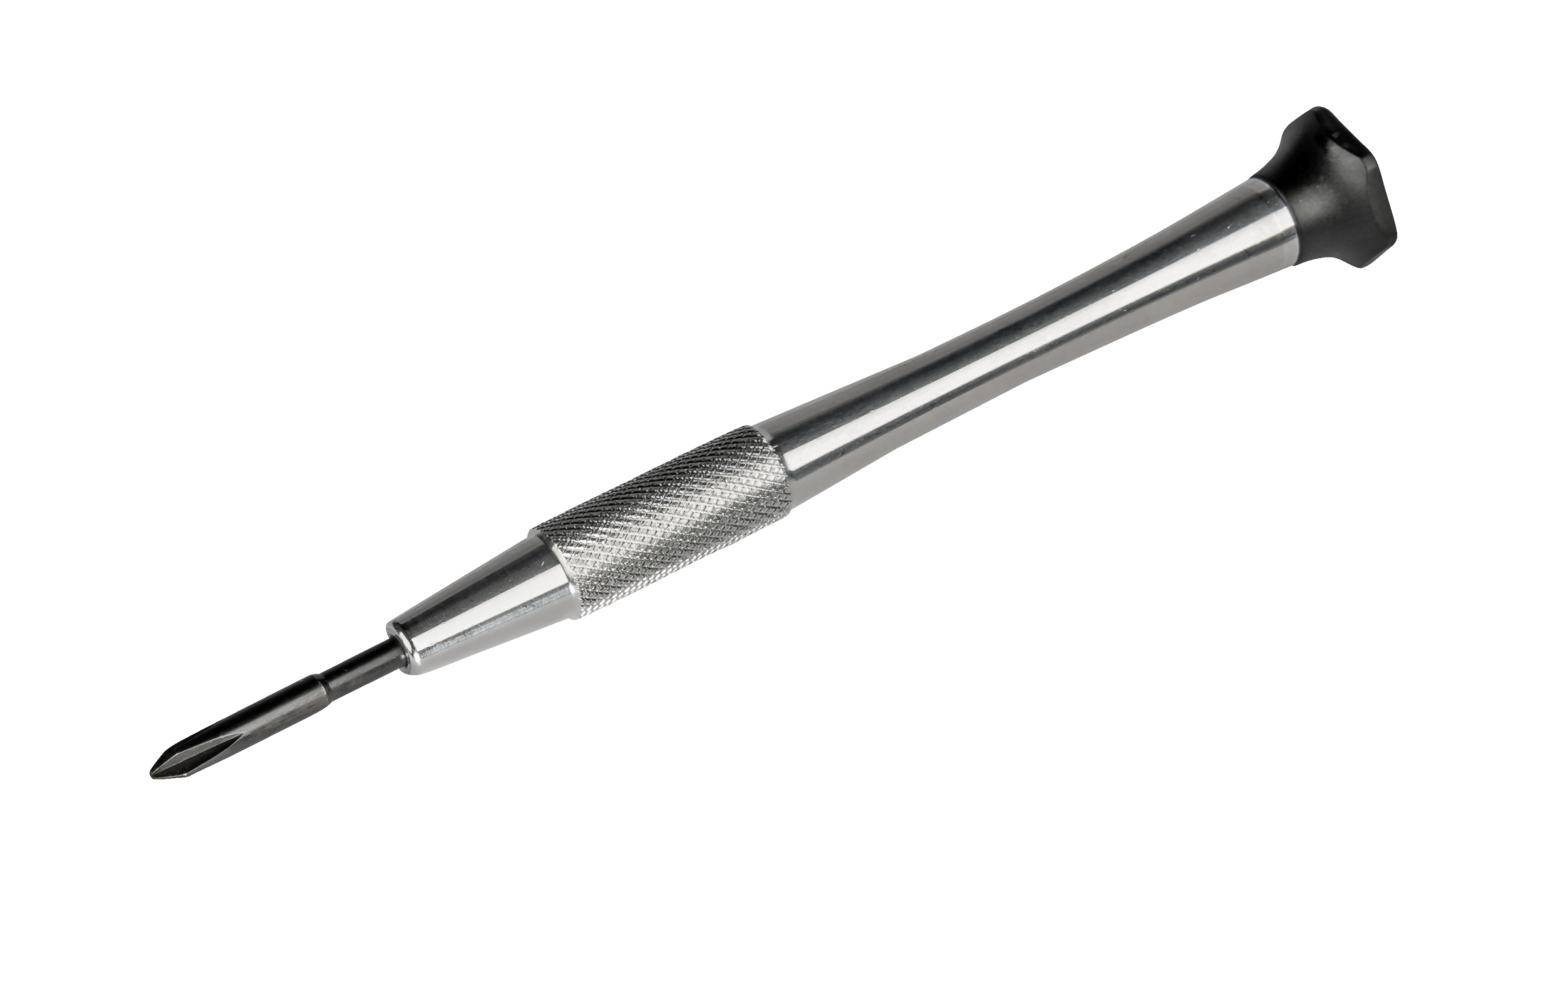 Phillips watchmaker's screwdriver 250-PH for delicate work for the highest demands